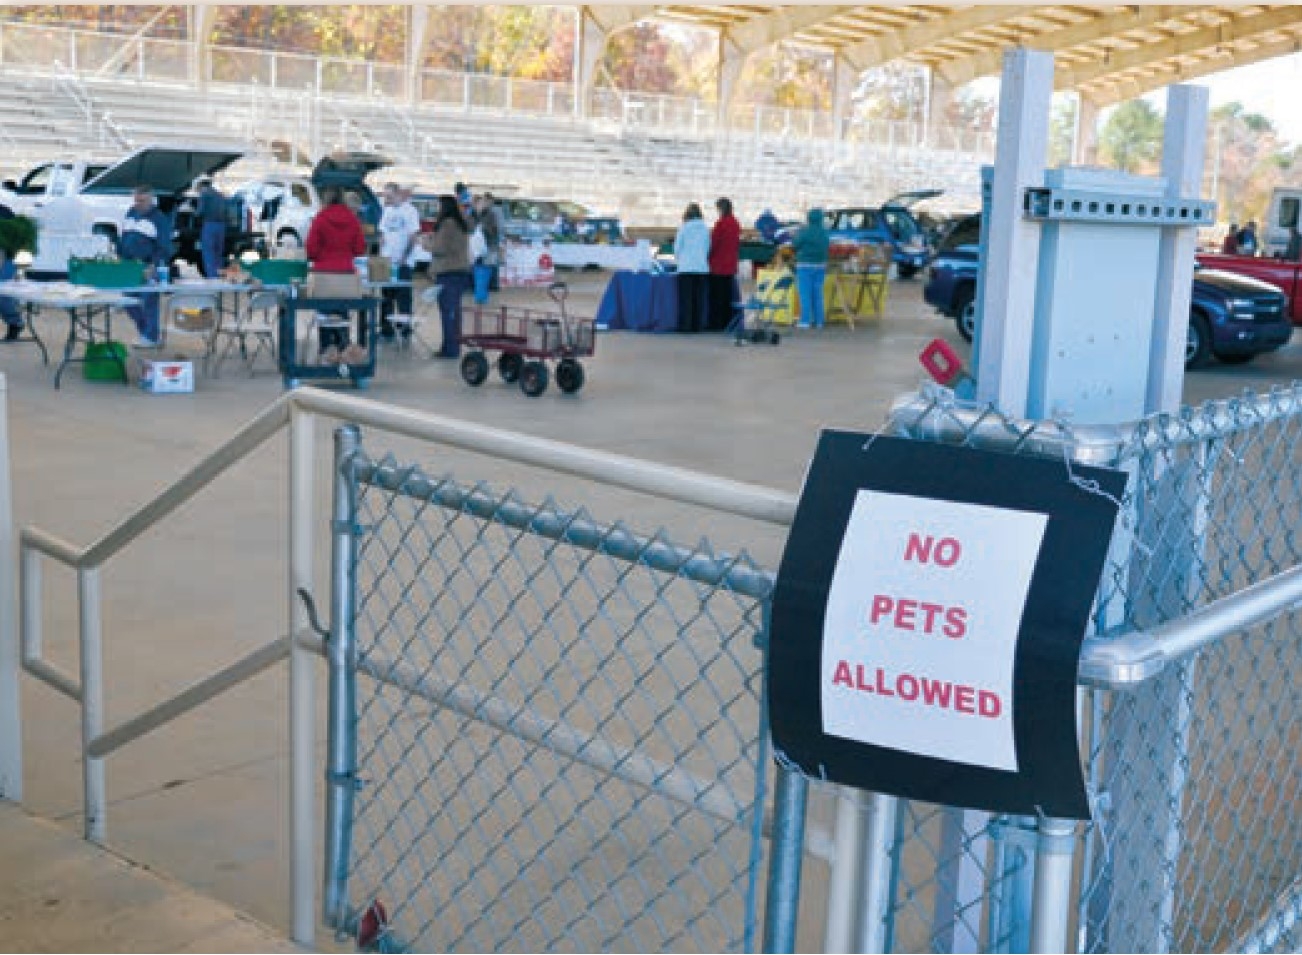 "No Pets Allowed" sign in market